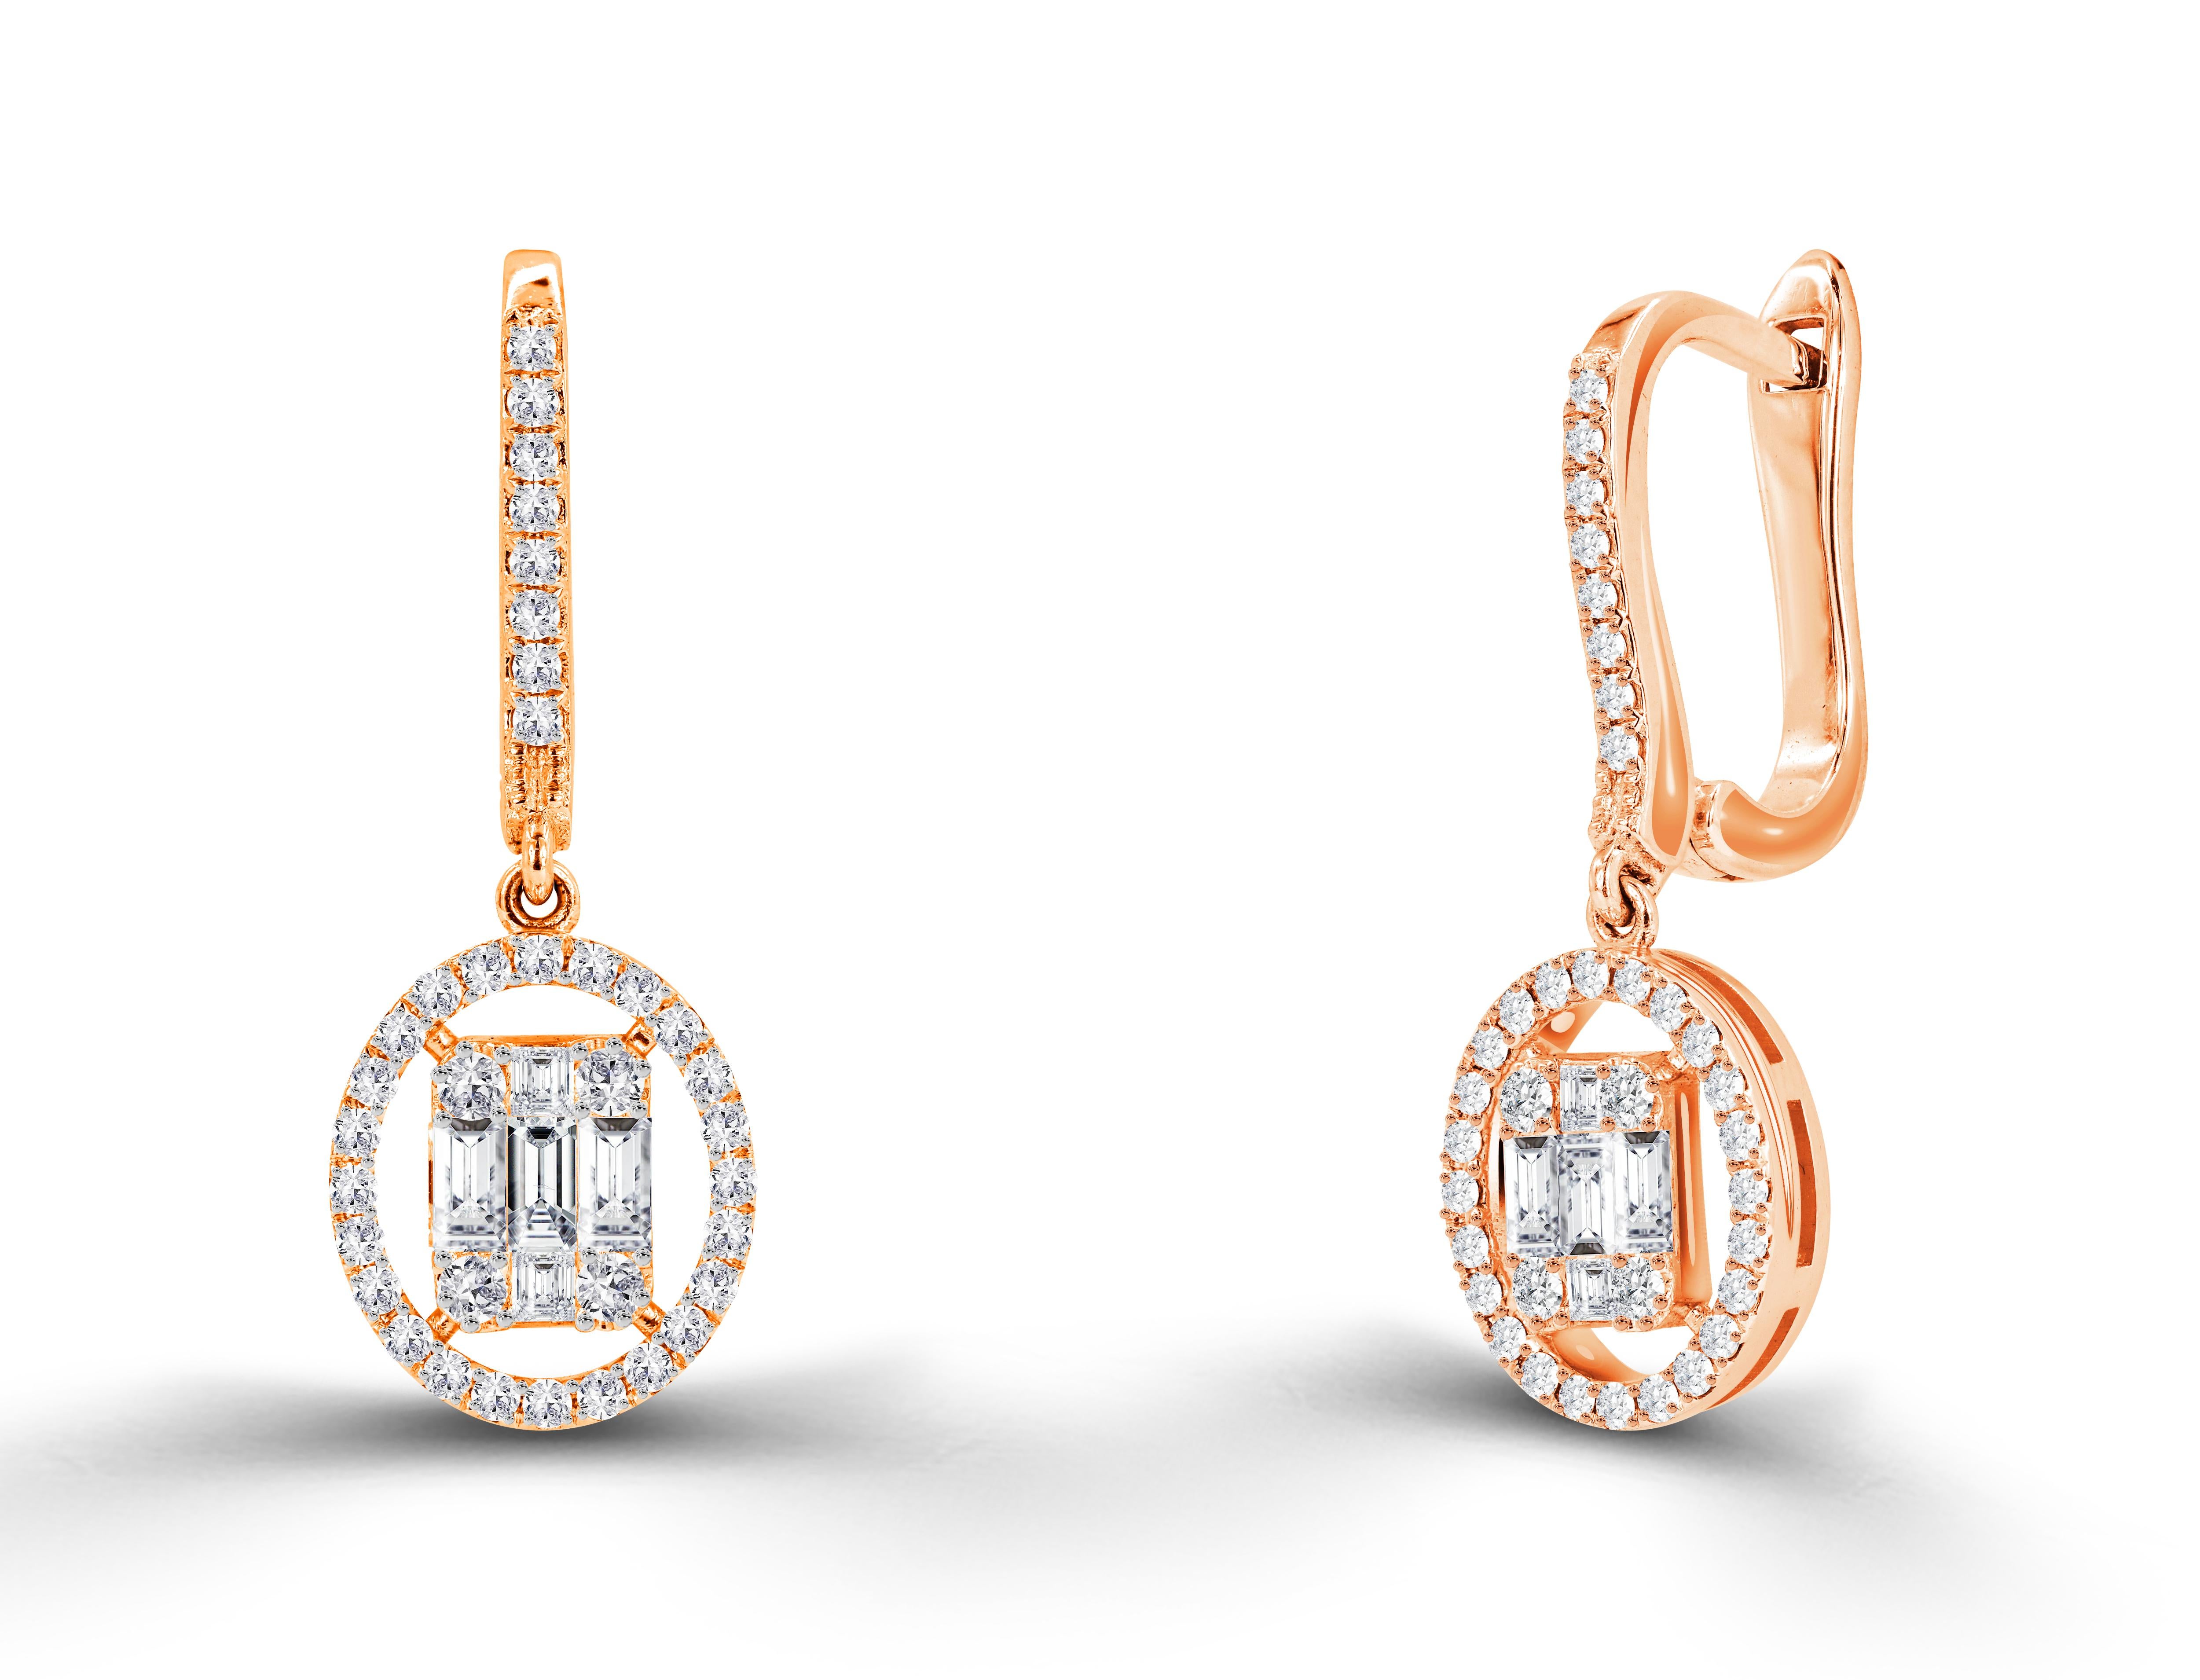 1.19 Ct Diamond  Baguette Drop Earrings in 18K Gold, Round Brilliant cut diamond earrings, Natural Diamond Earrings, Lever-Back earrings, Heavy End Earrings.

Oshi Jewels presents to you a beautiful Earring collection with natural diamonds that last